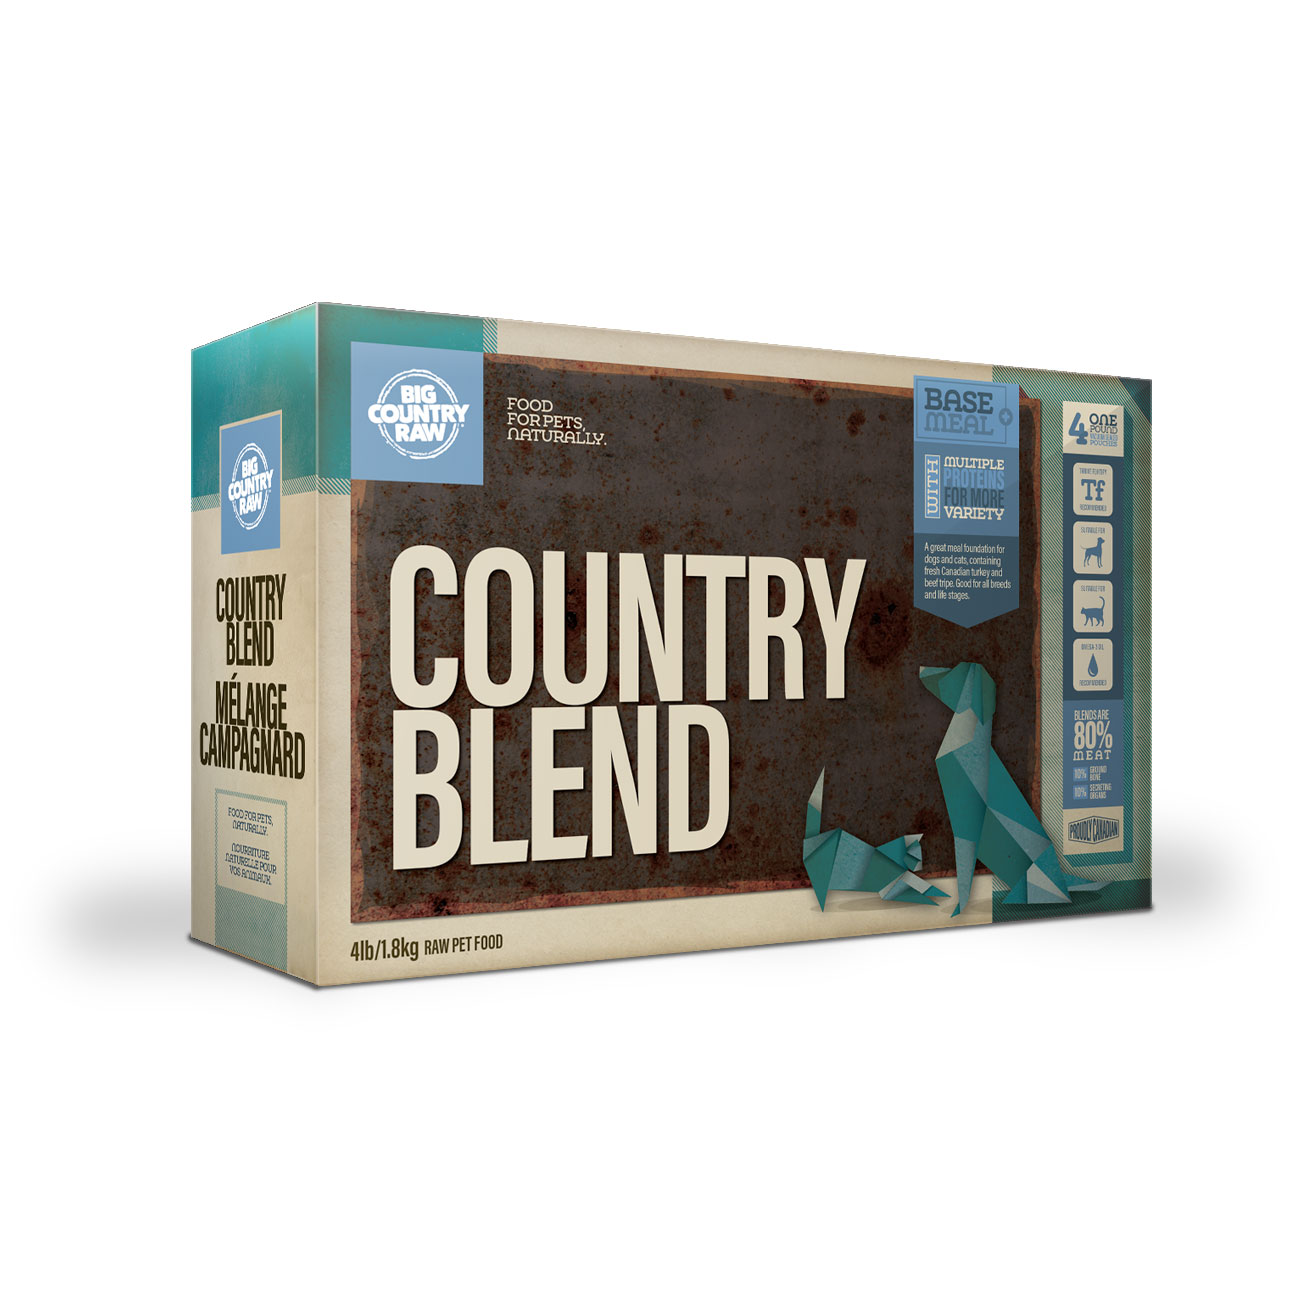 Big Country Raw - Signature Blends - 4lbs